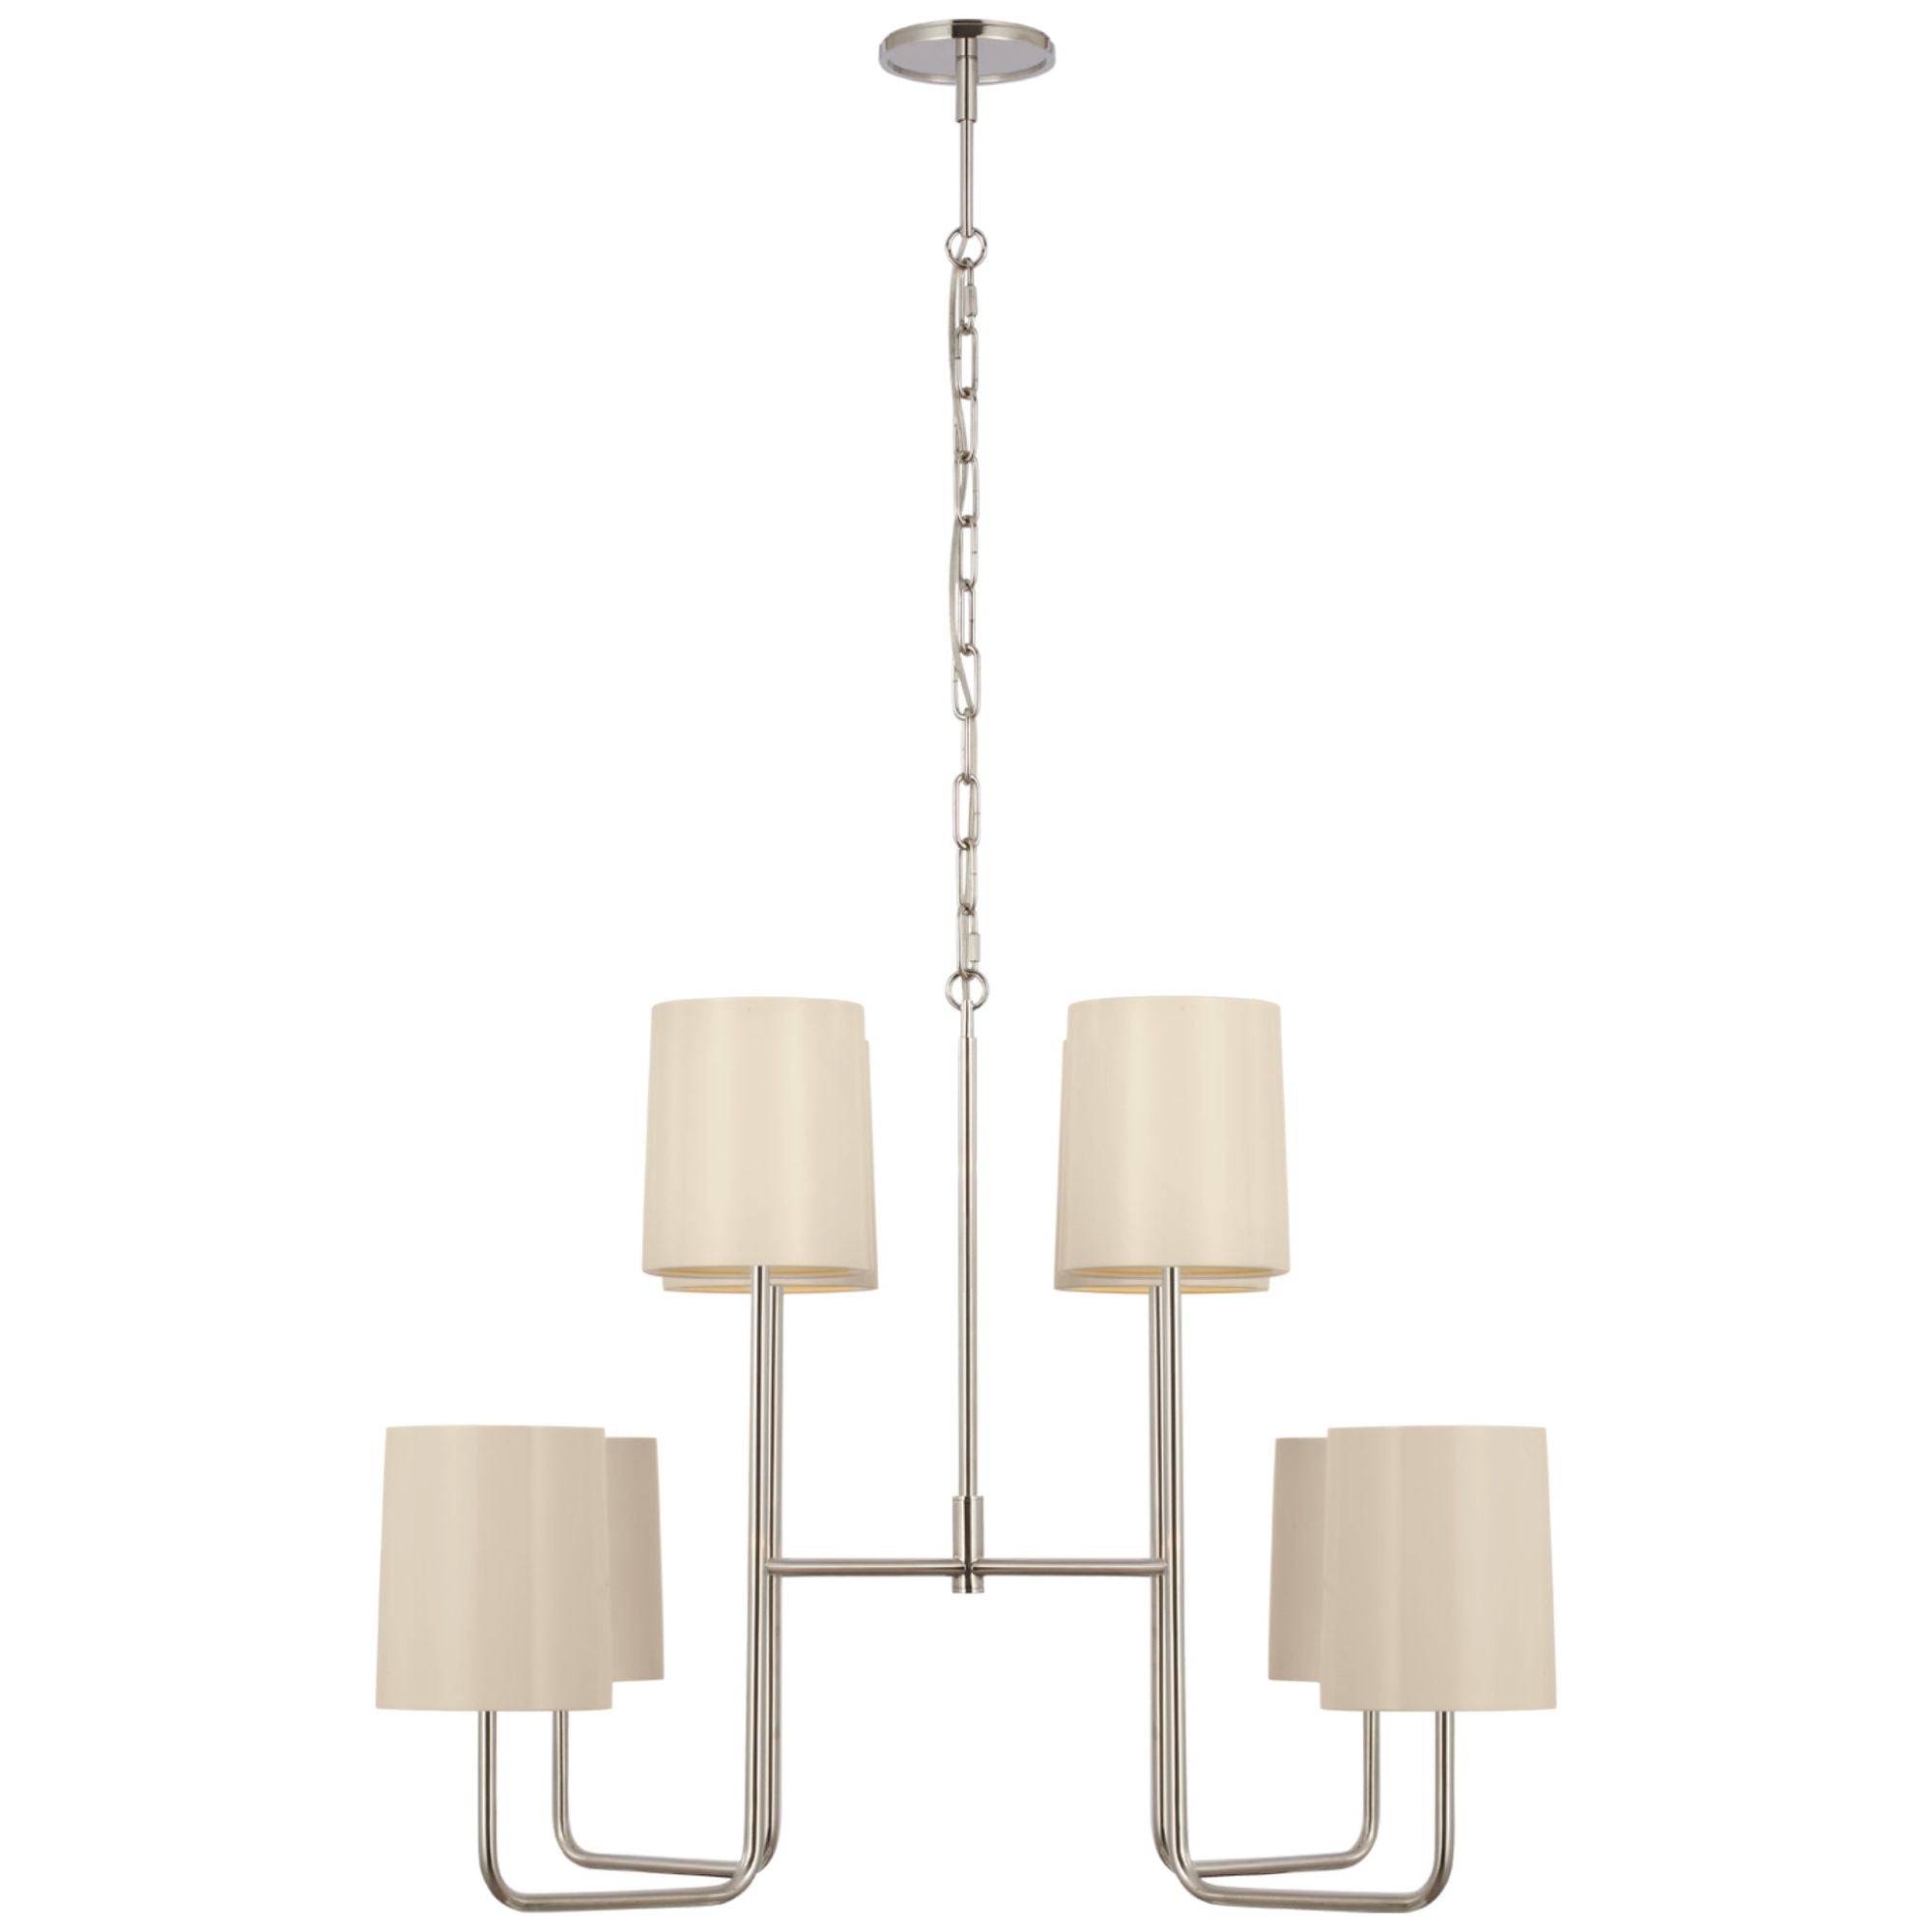 Barbara Barry Go Lightly Extra Large Two Tier Chandelier in Polished Nickel with China White Shades